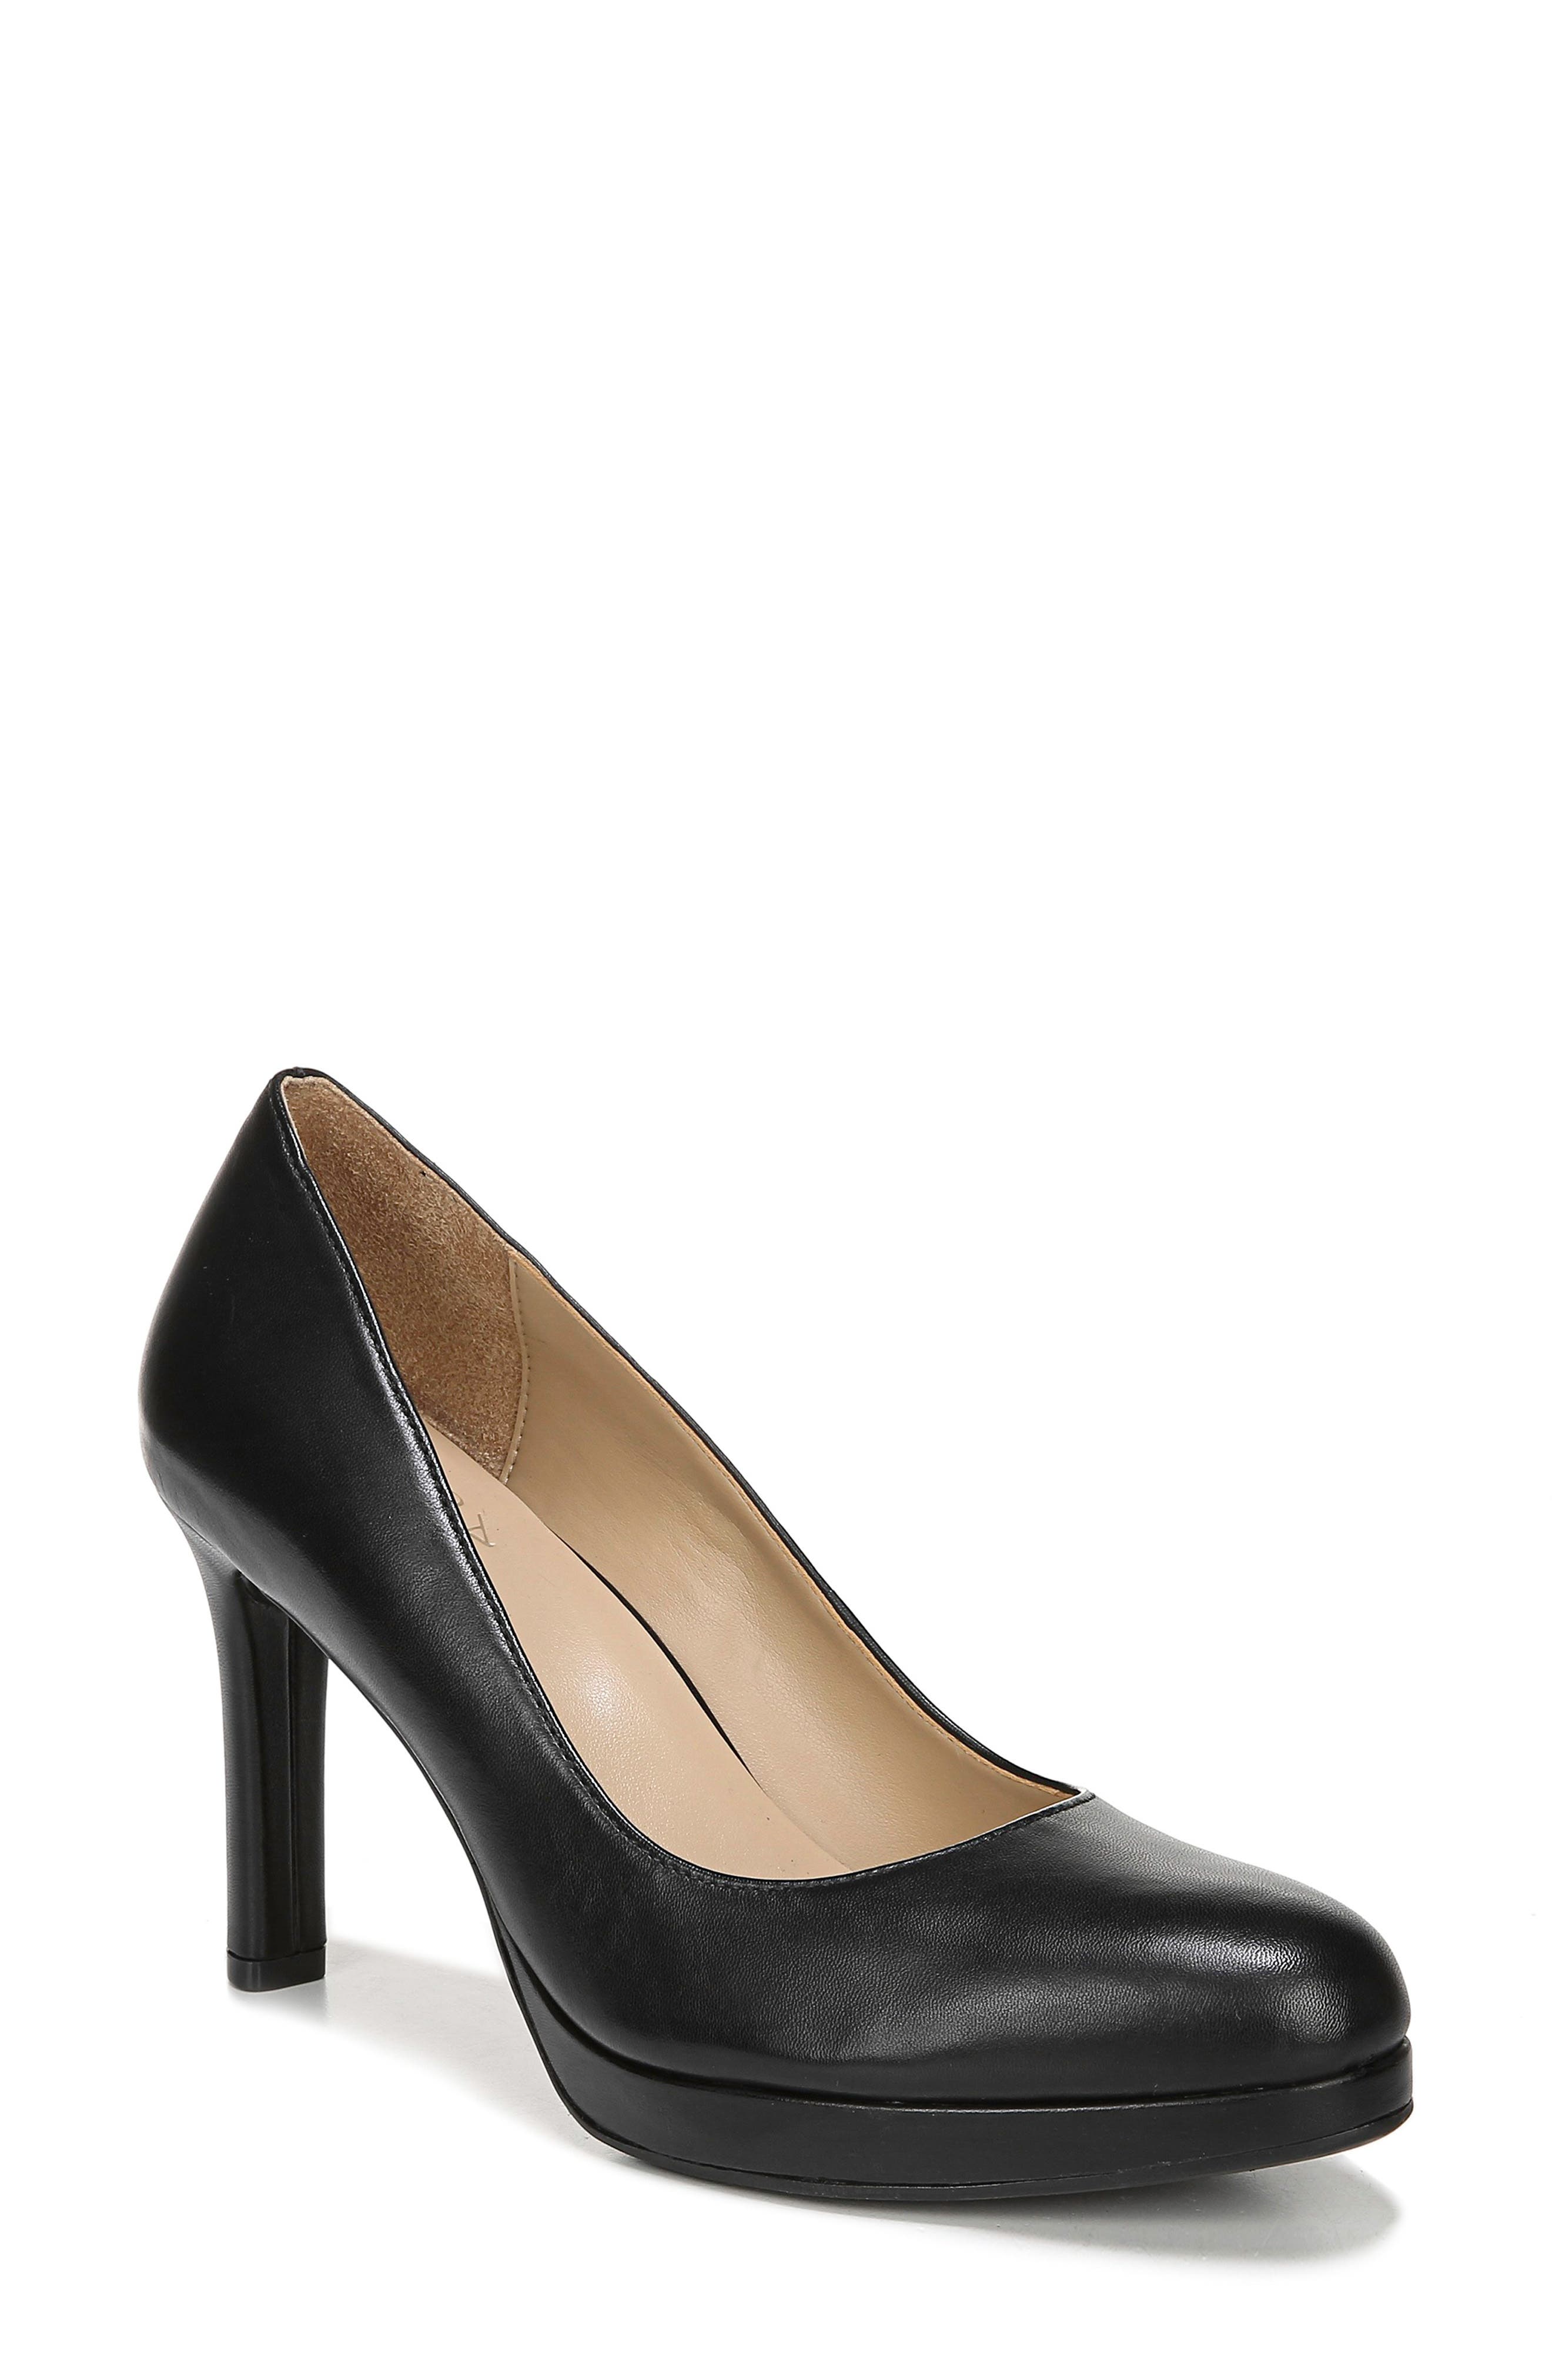 Women's Naturalizer Shoes | Nordstrom